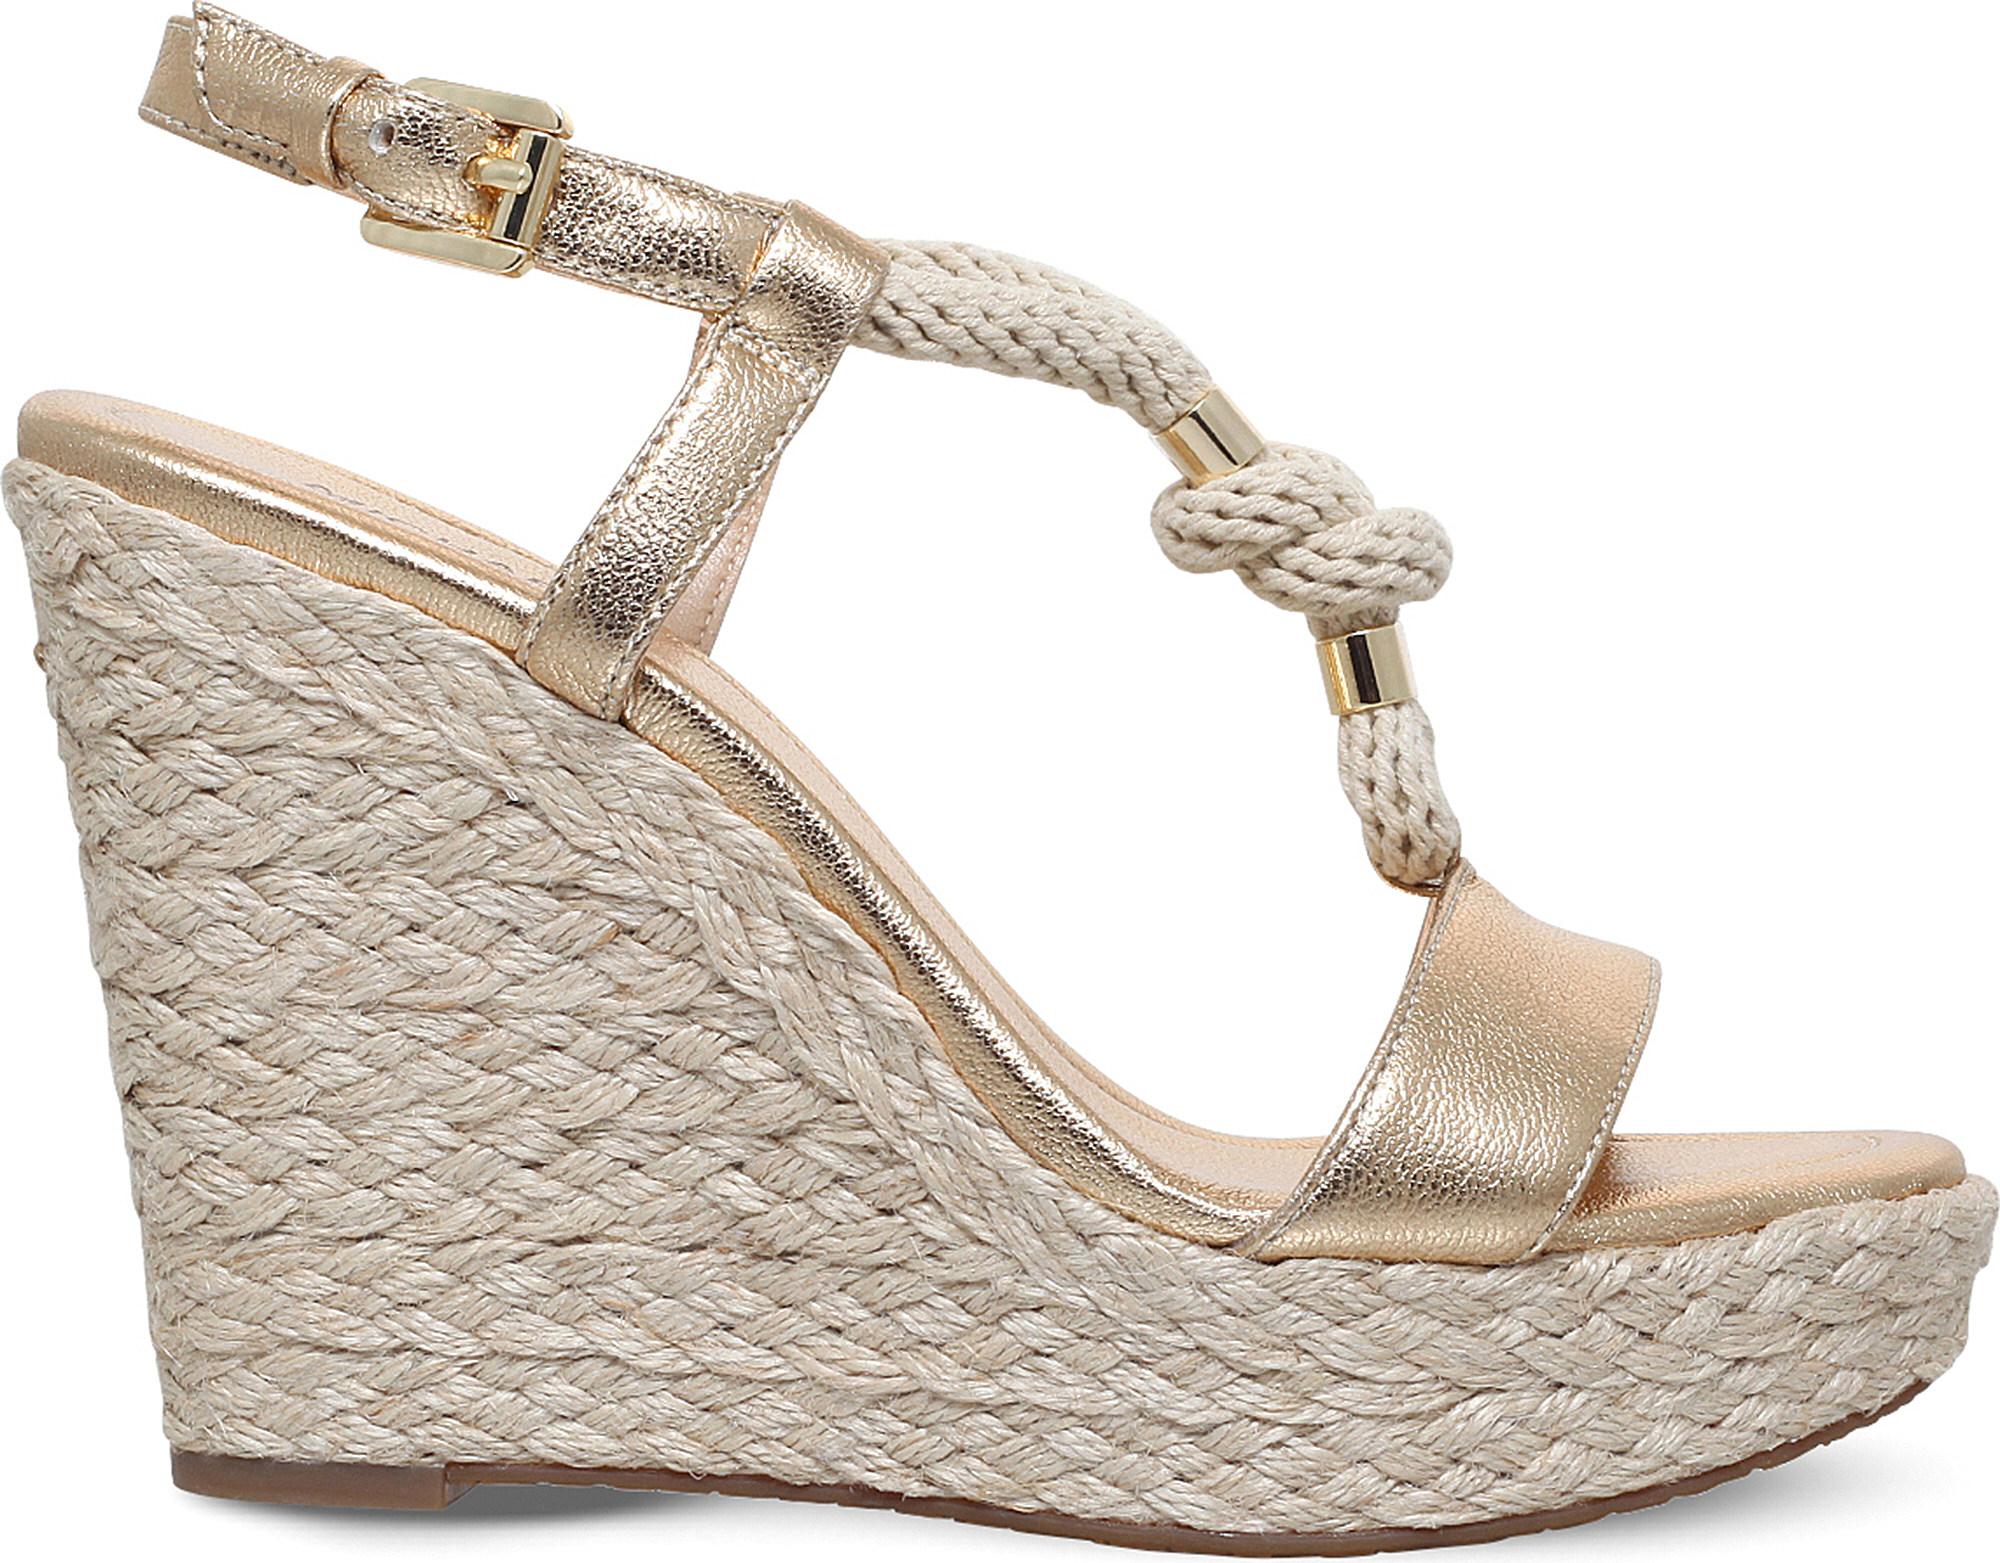 Plys dukke shuttle Mistillid MICHAEL Michael Kors Holly Wedge Leather And Rope Sandals in Gold  (Metallic) - Lyst